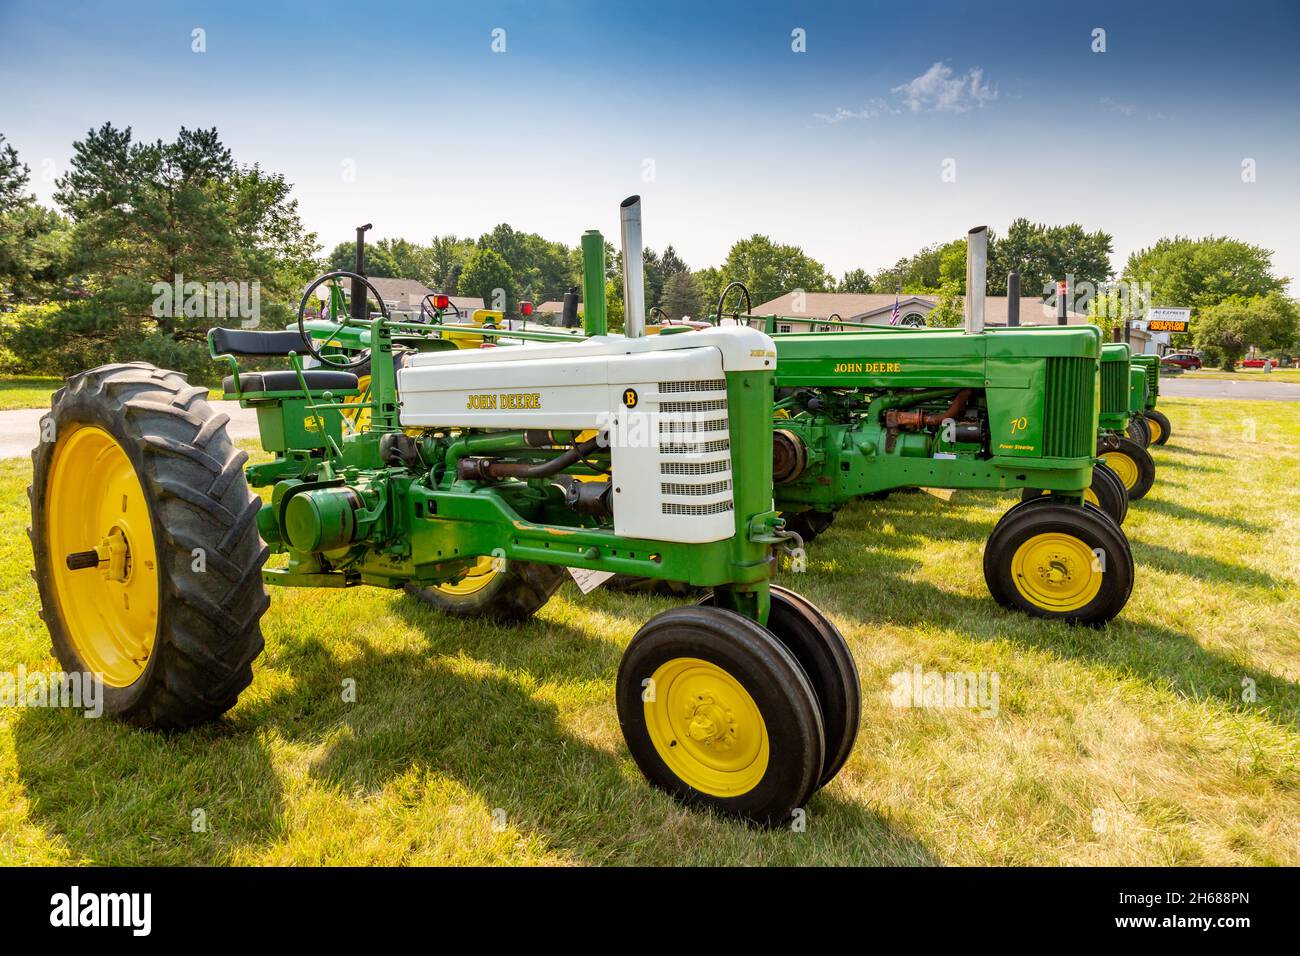 A model B and a model 70 lead a line of antique John Deere farm tractors at a tractor show in Warren, Indiana, USA. Stock Photo